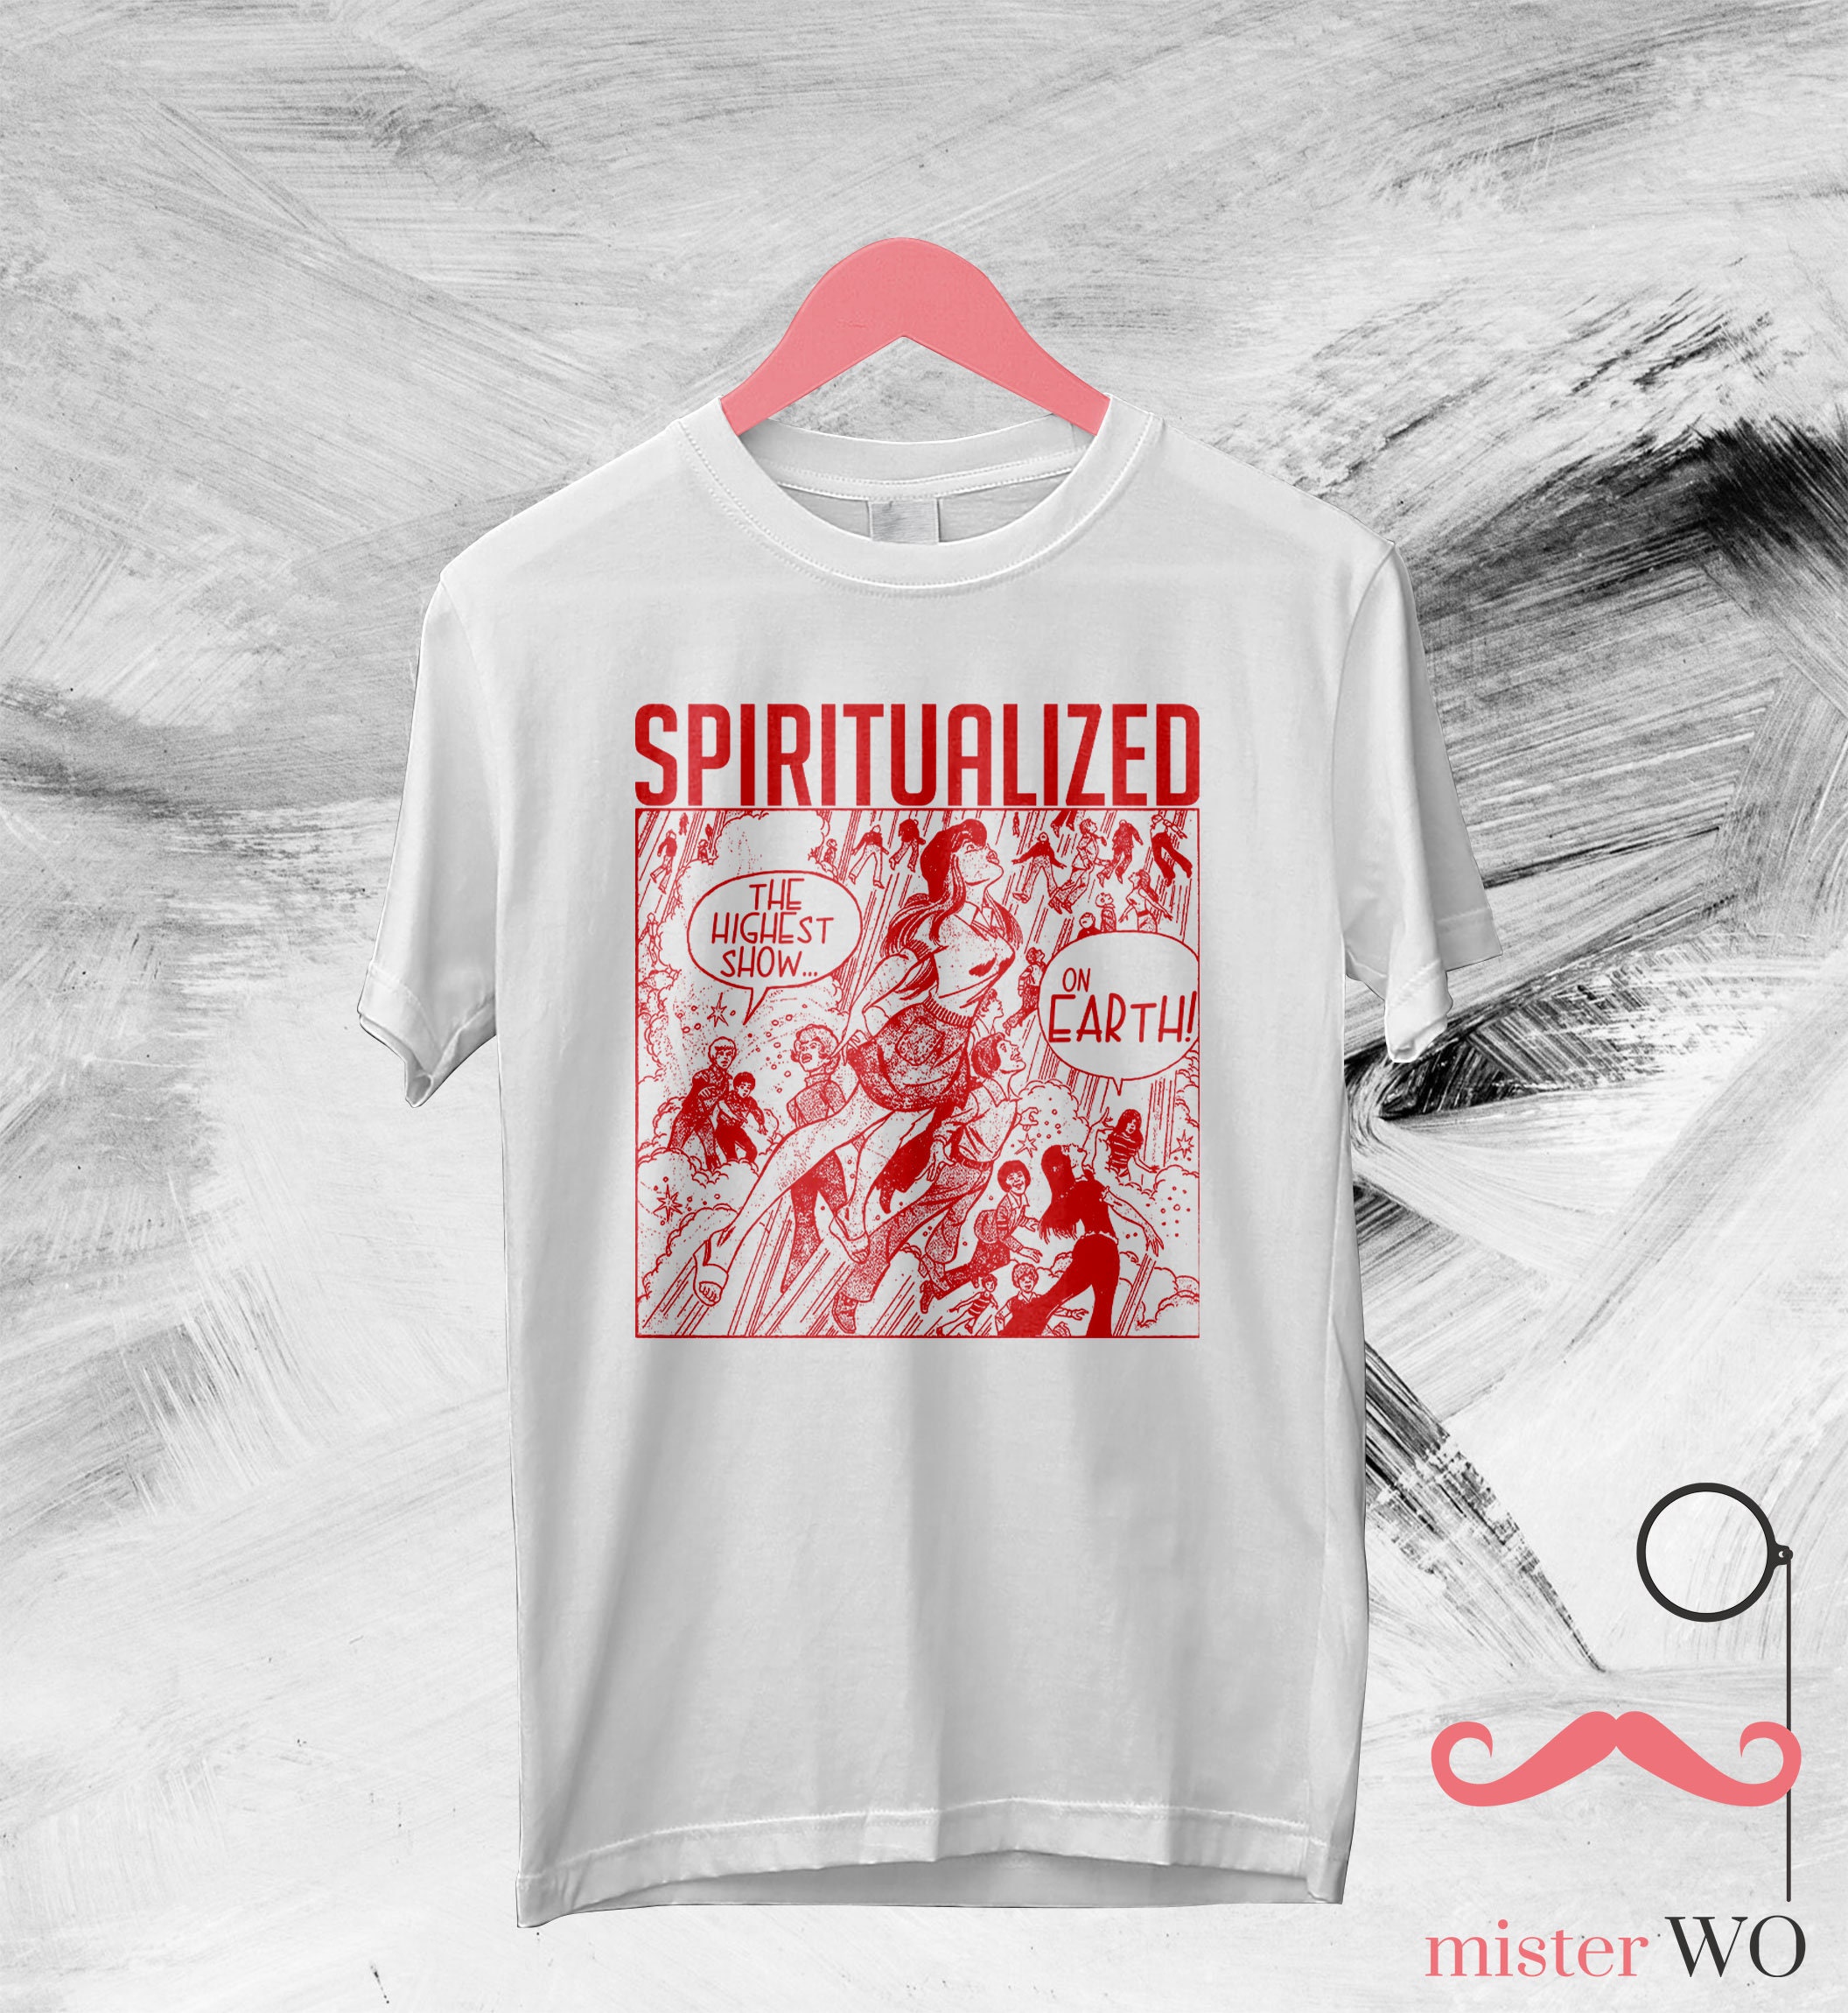 Discover Spiritualized Highest Show On Earth T-Shirt - Spiritualized Shirt, Jason Pierce Shirt, Classic Rock Music